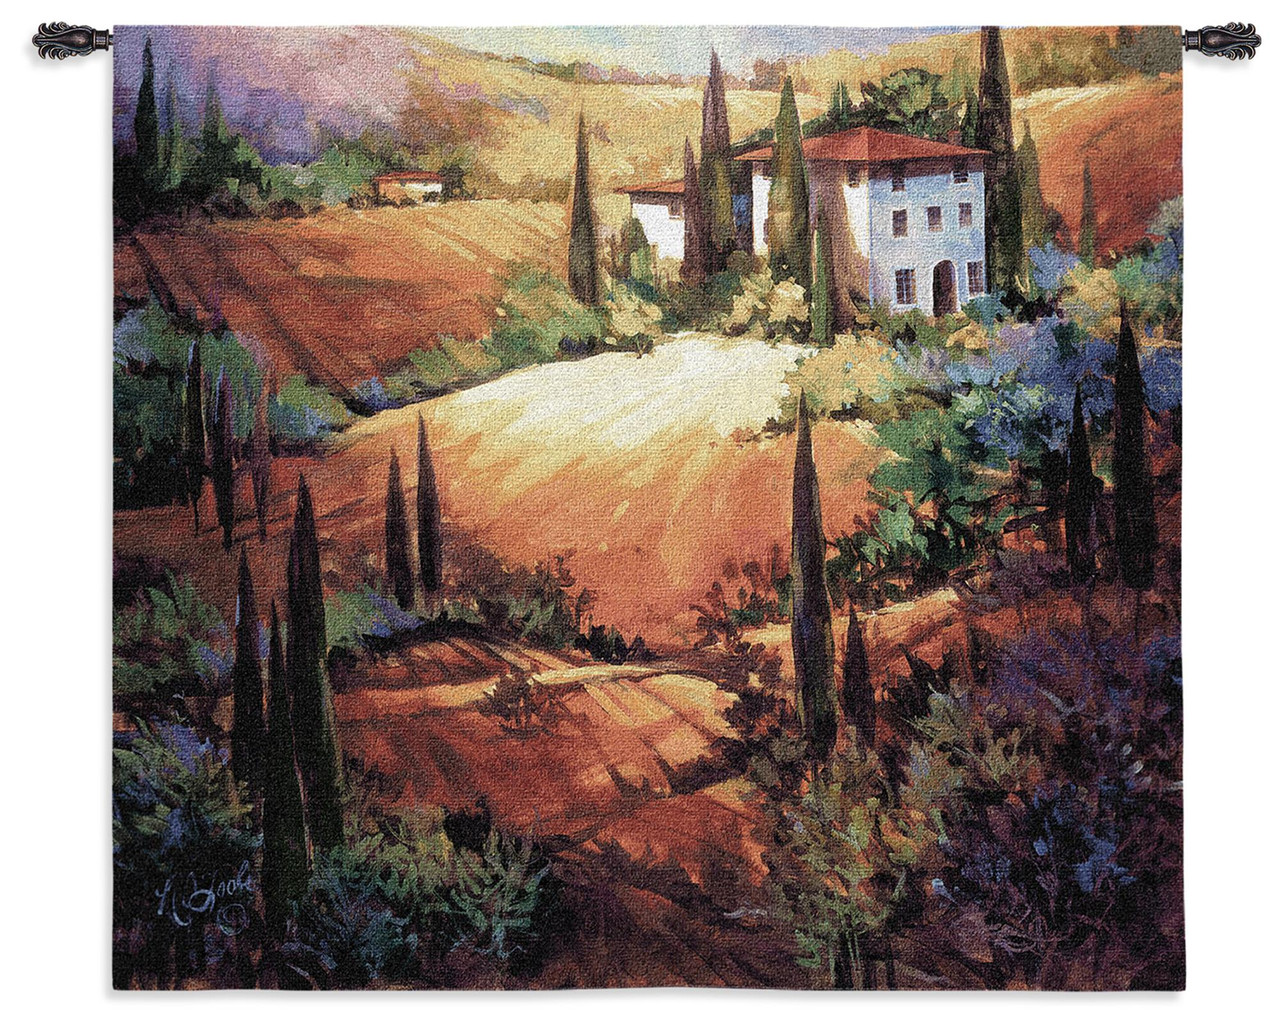 Morning Light by Nancy O'Toole Woven Tapestry Wall Art Hanging Warm  Sunset on Tuscan Villa Landscape 100% Cotton USA Size 53x53